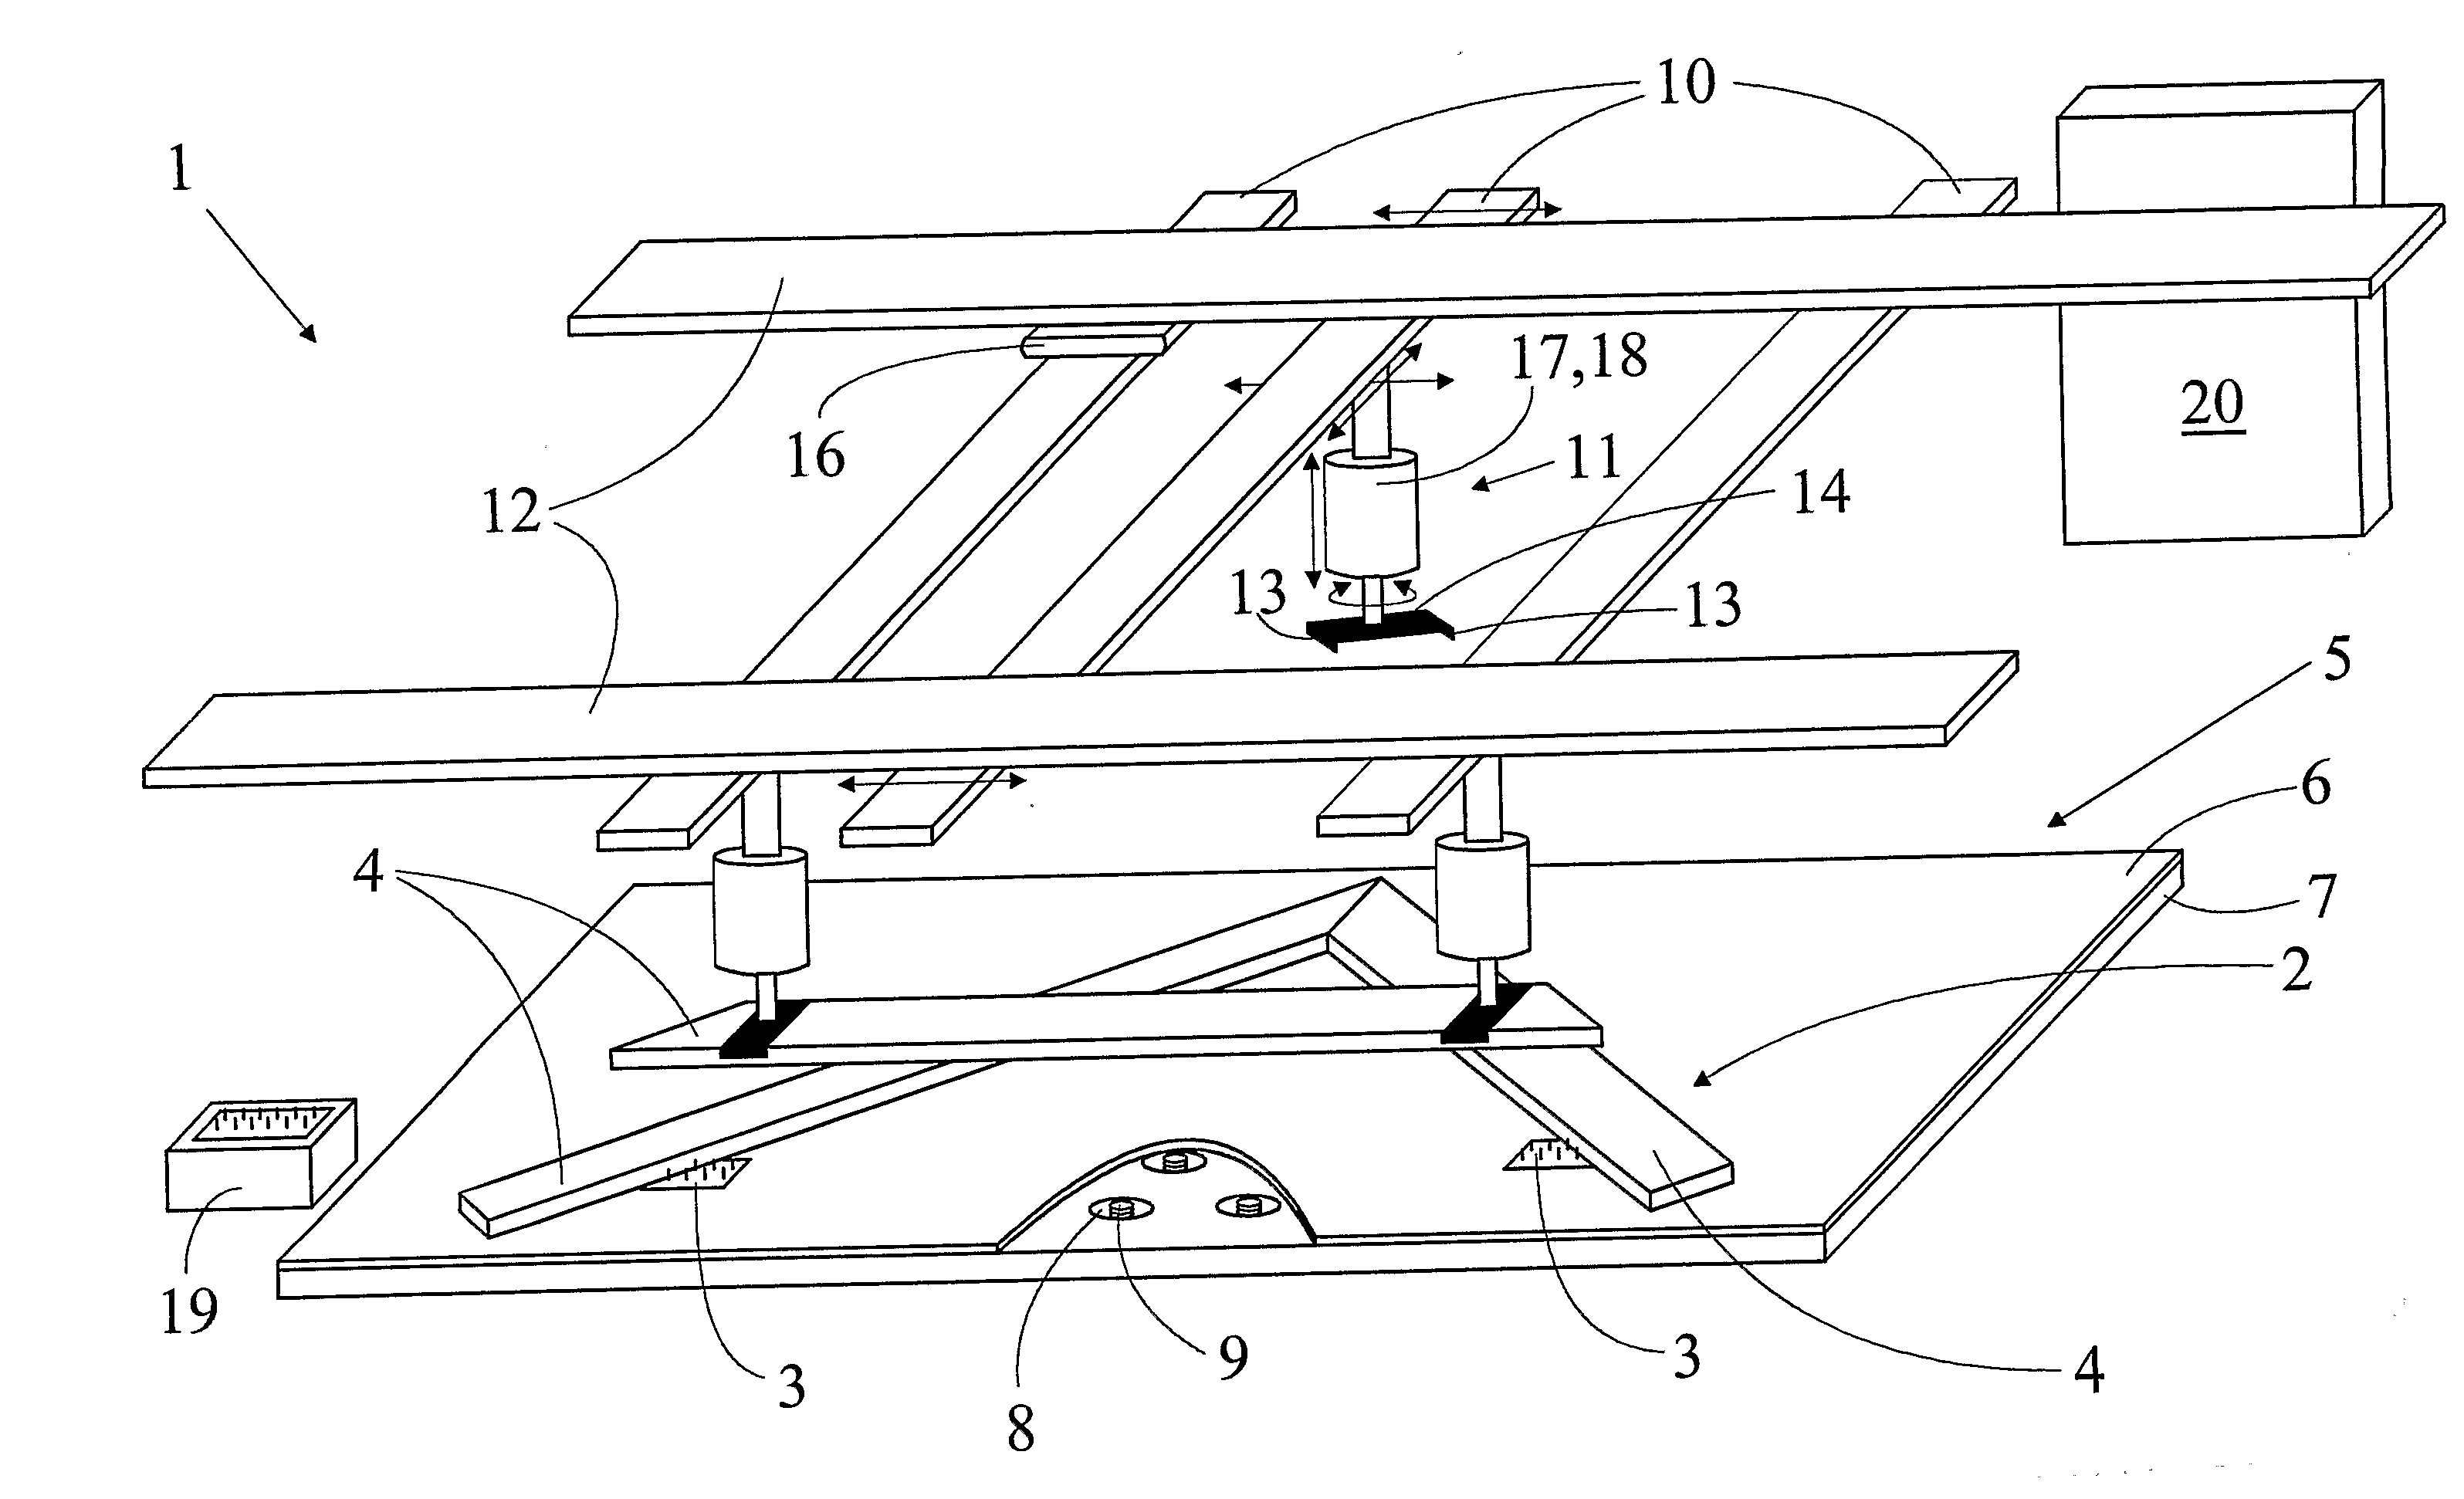 Method and Apparatus For Manufactring a Nail Plate Truss Without Setting